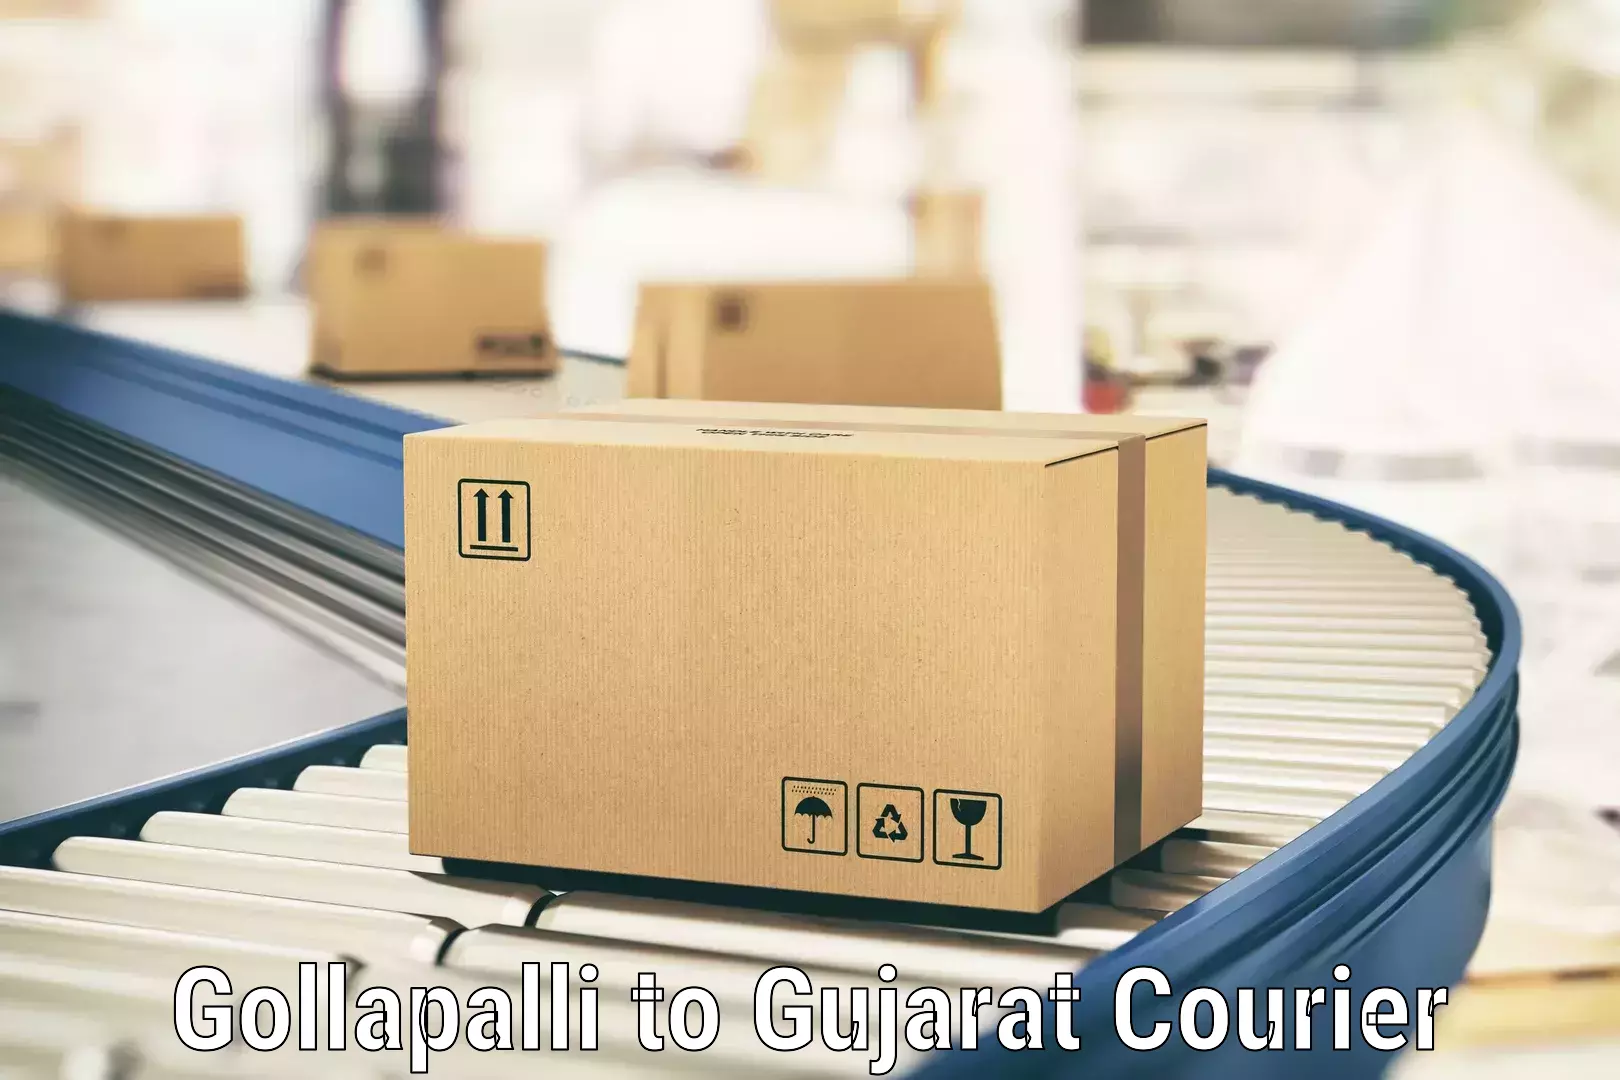 Global courier networks Gollapalli to Tapi